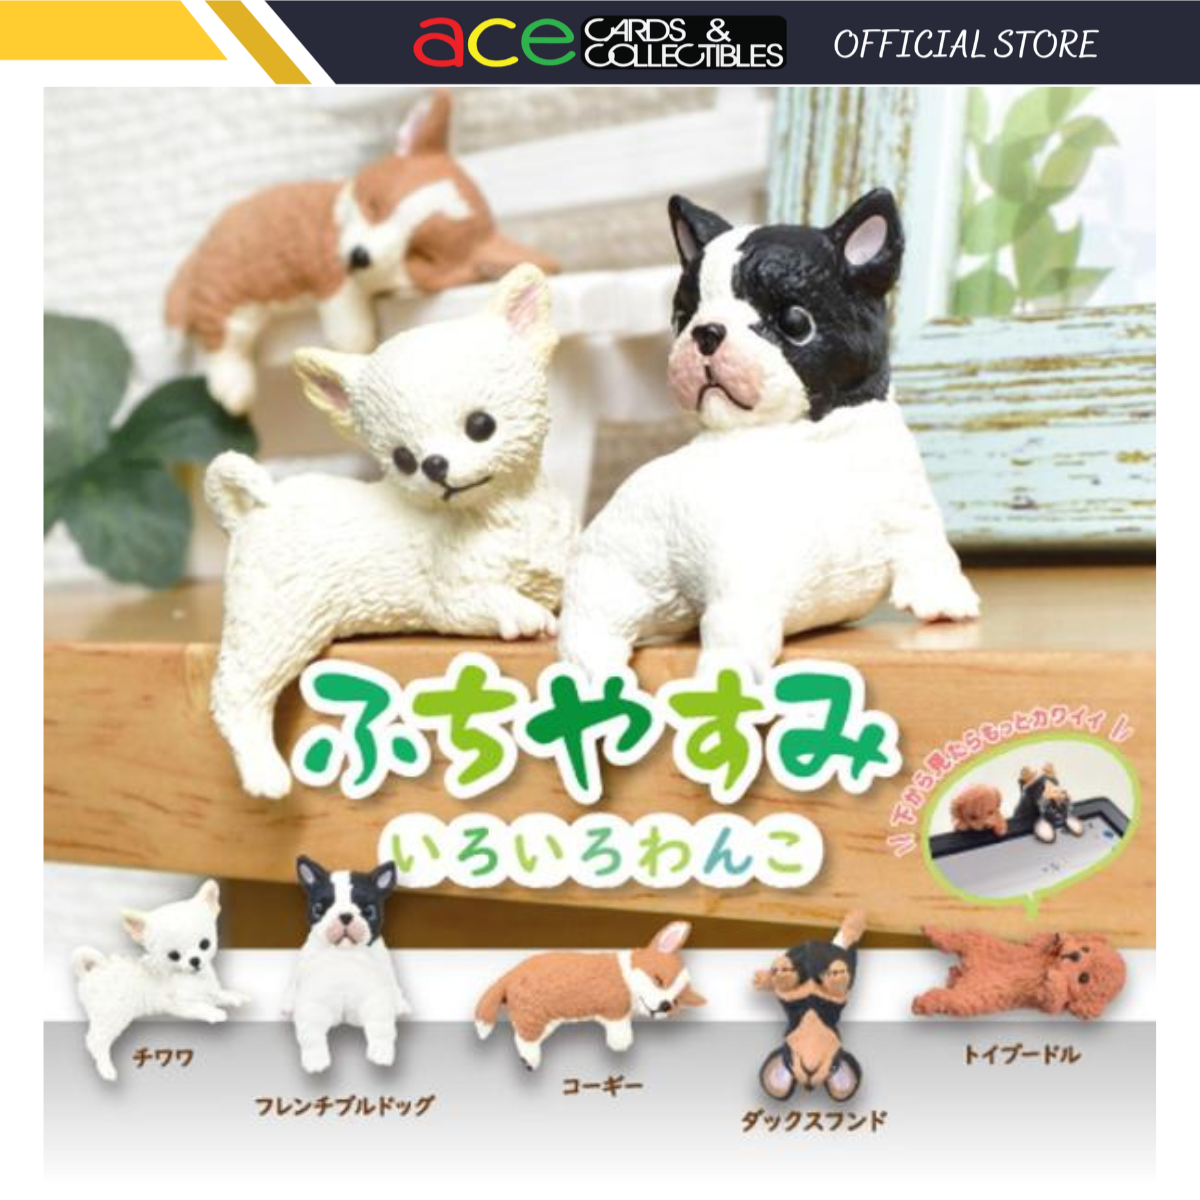 Yell x Edge Rest Dog Series-Display Box (10 pcs)-Yell-Ace Cards &amp; Collectibles